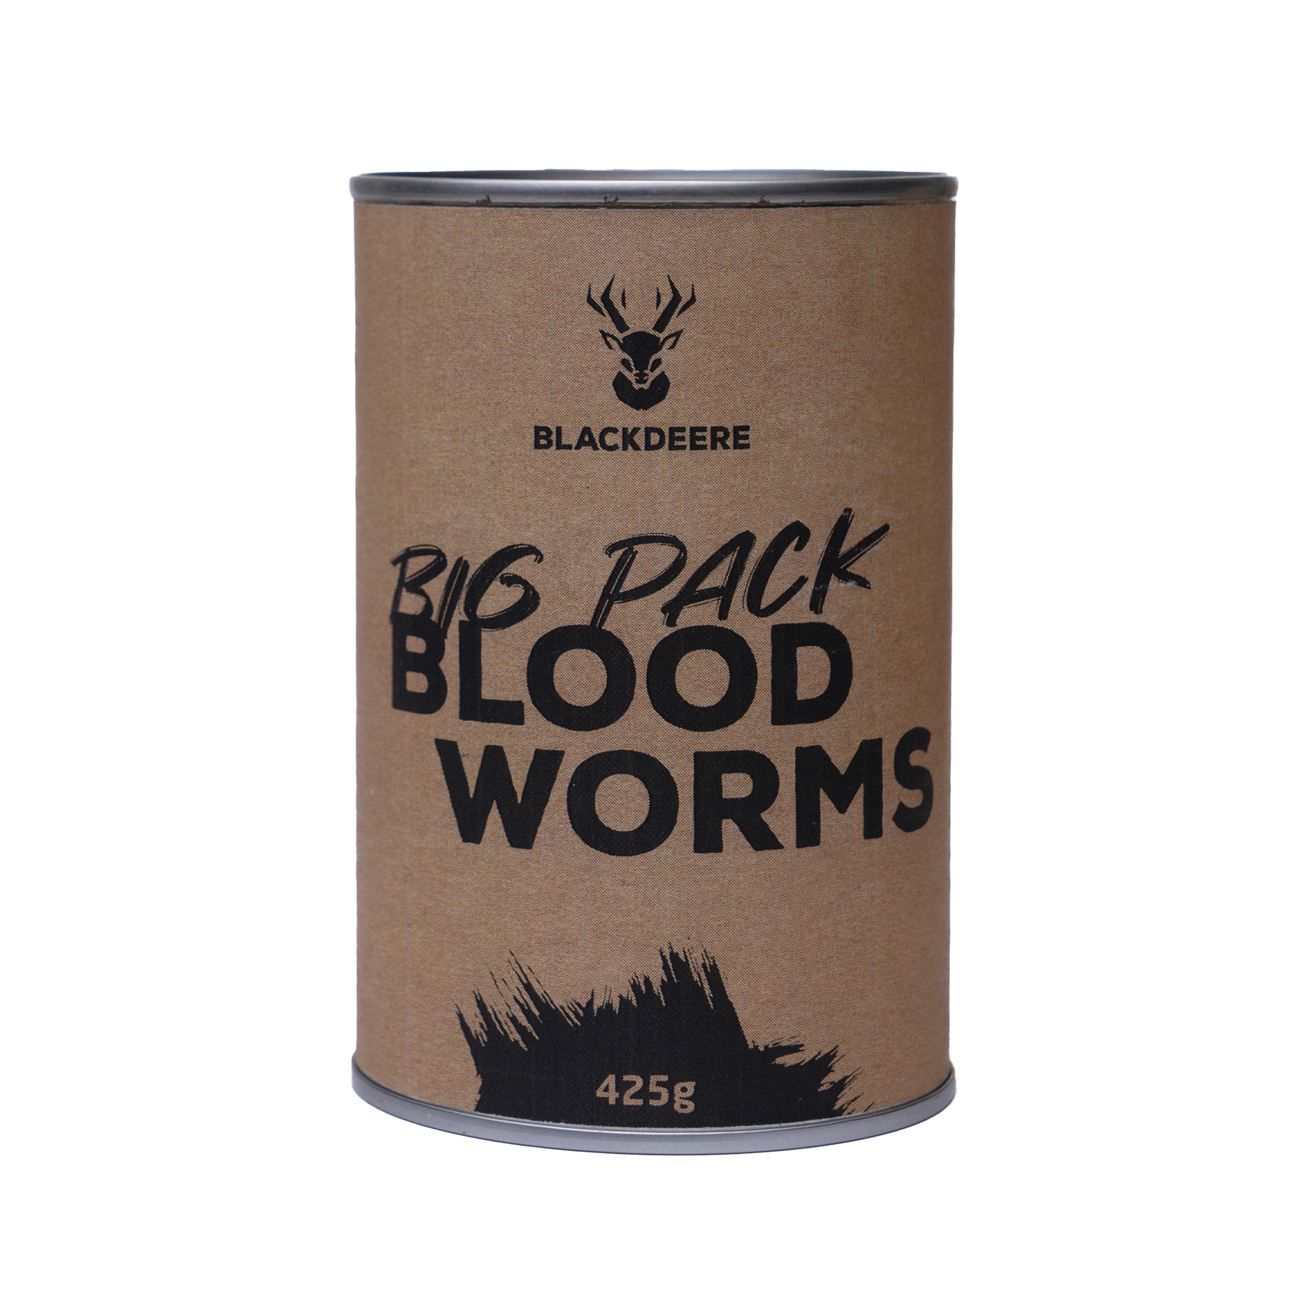 Blackdeere-Ready-Bloodworms-425g-2